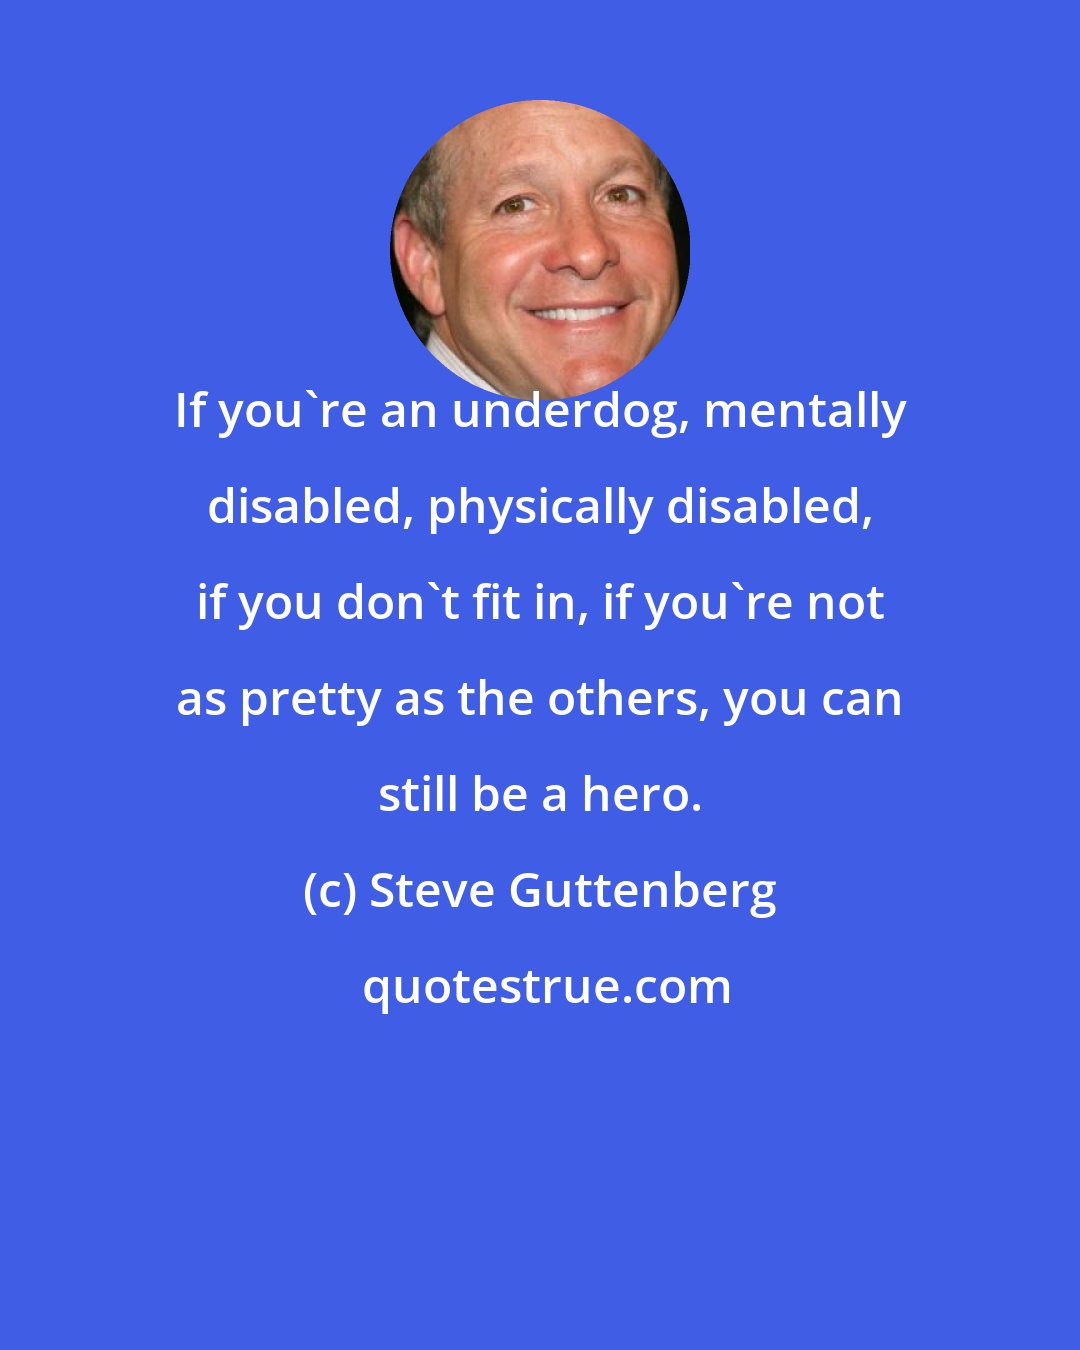 Steve Guttenberg: If you're an underdog, mentally disabled, physically disabled, if you don't fit in, if you're not as pretty as the others, you can still be a hero.